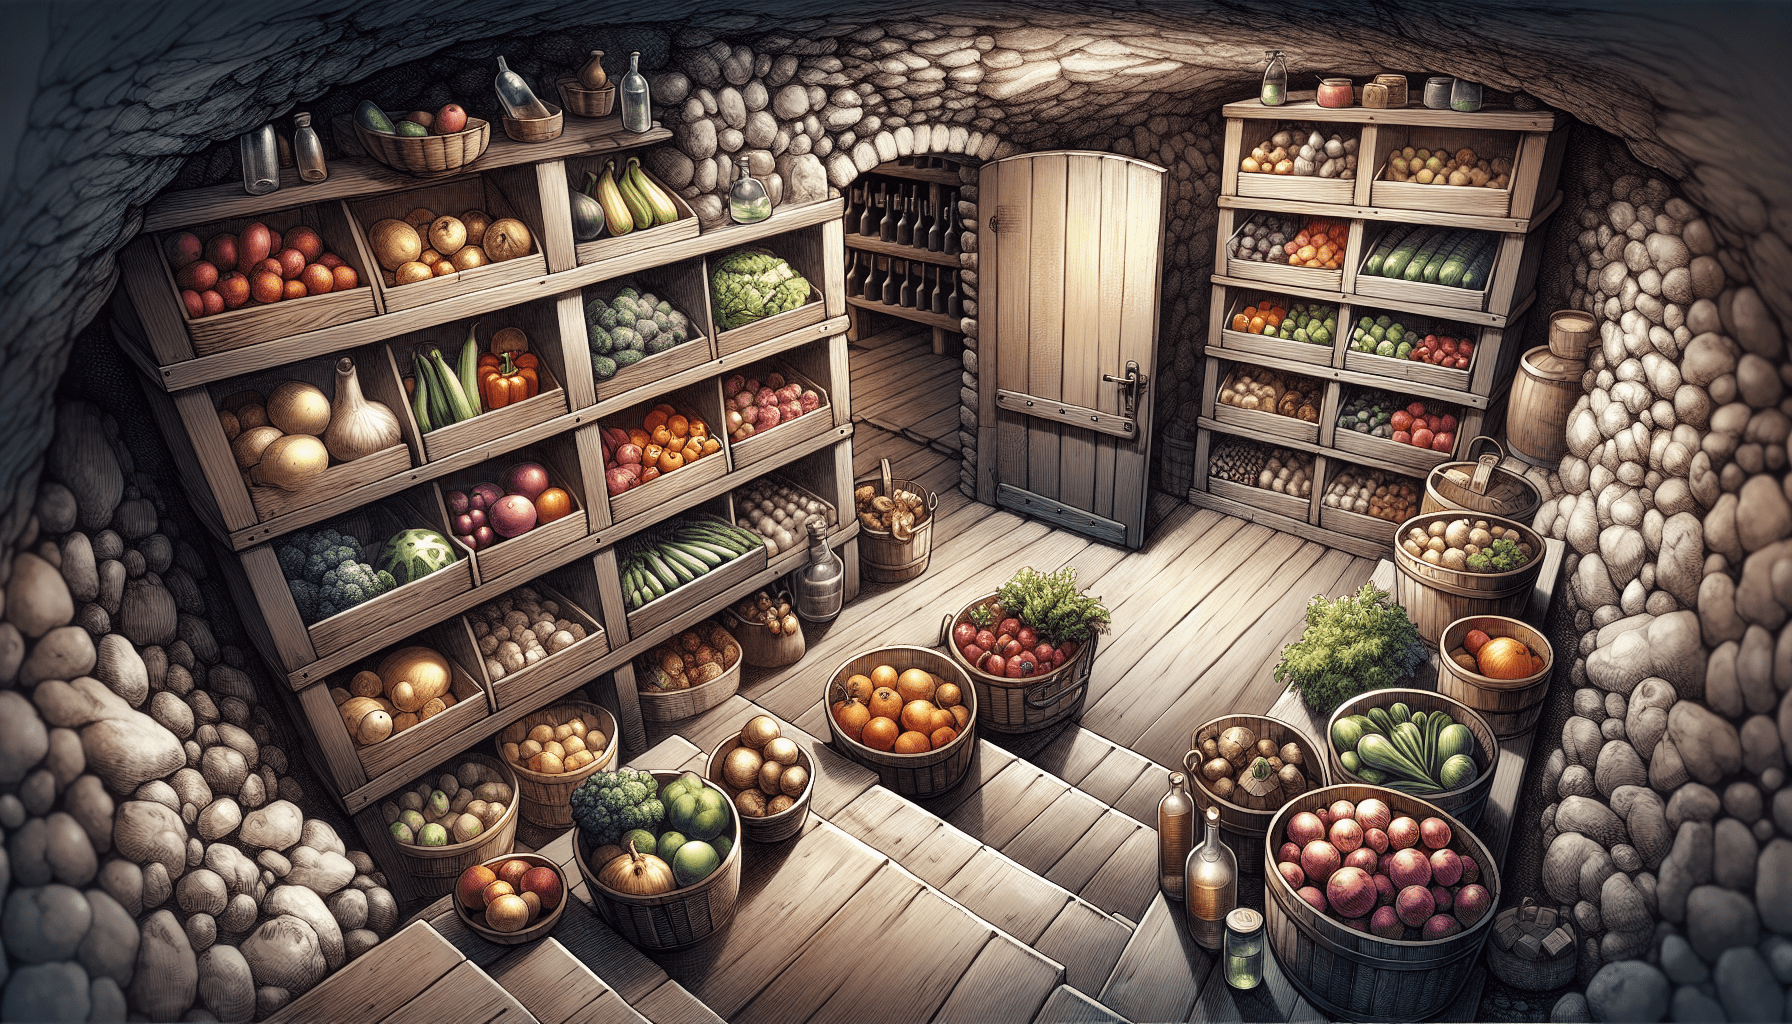 How To Build A Root Cellar For Food Storage